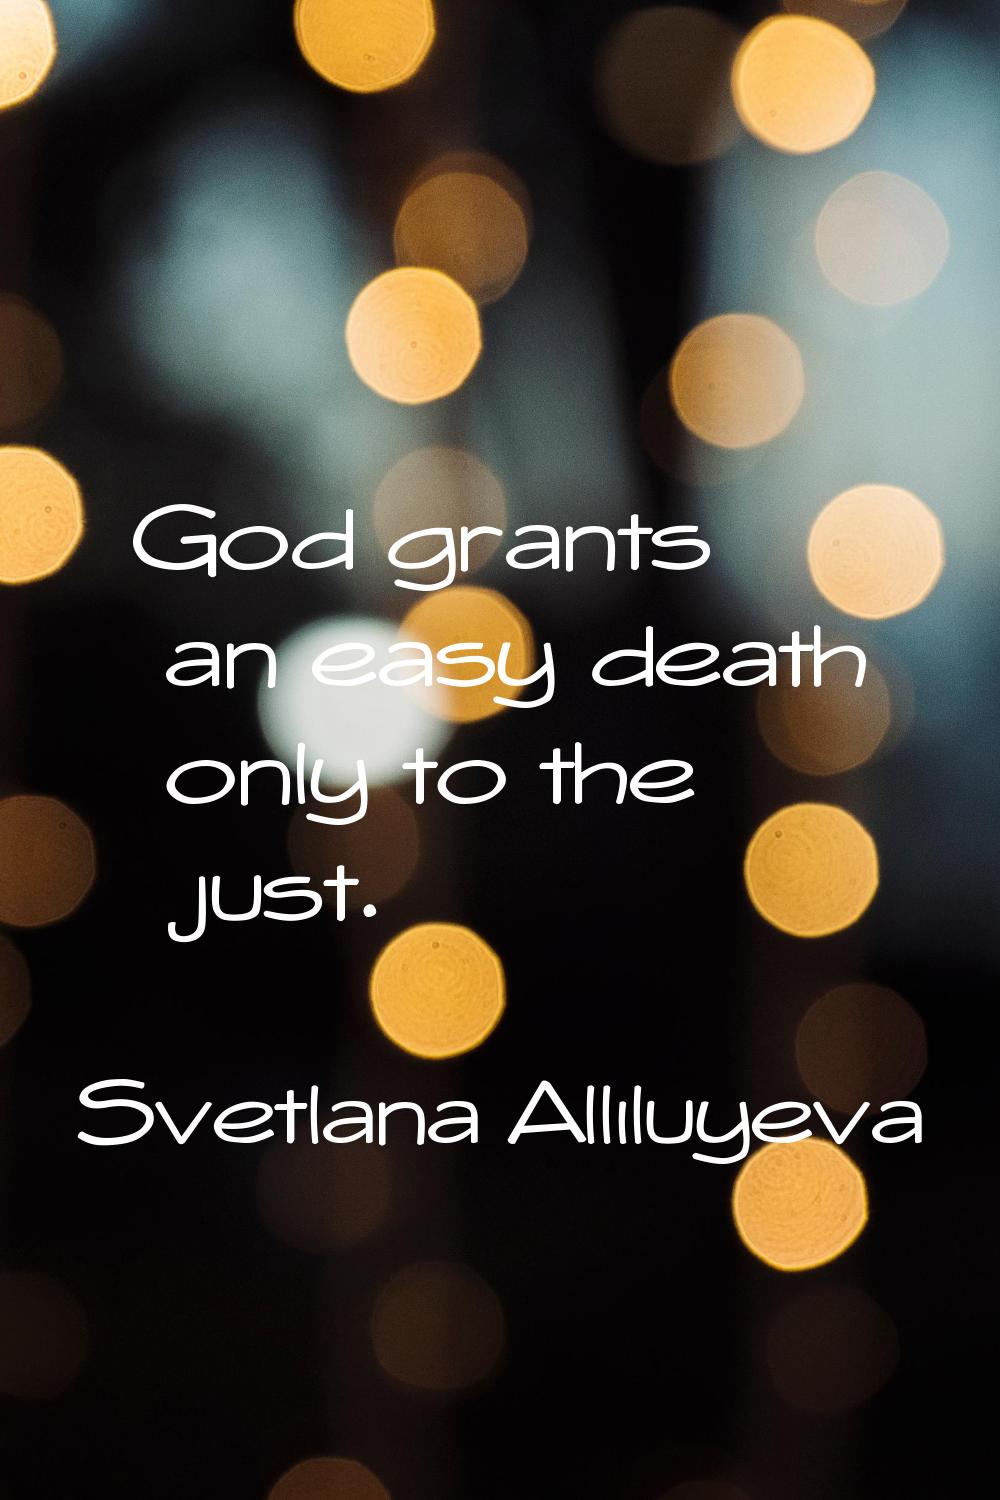 God grants an easy death only to the just.